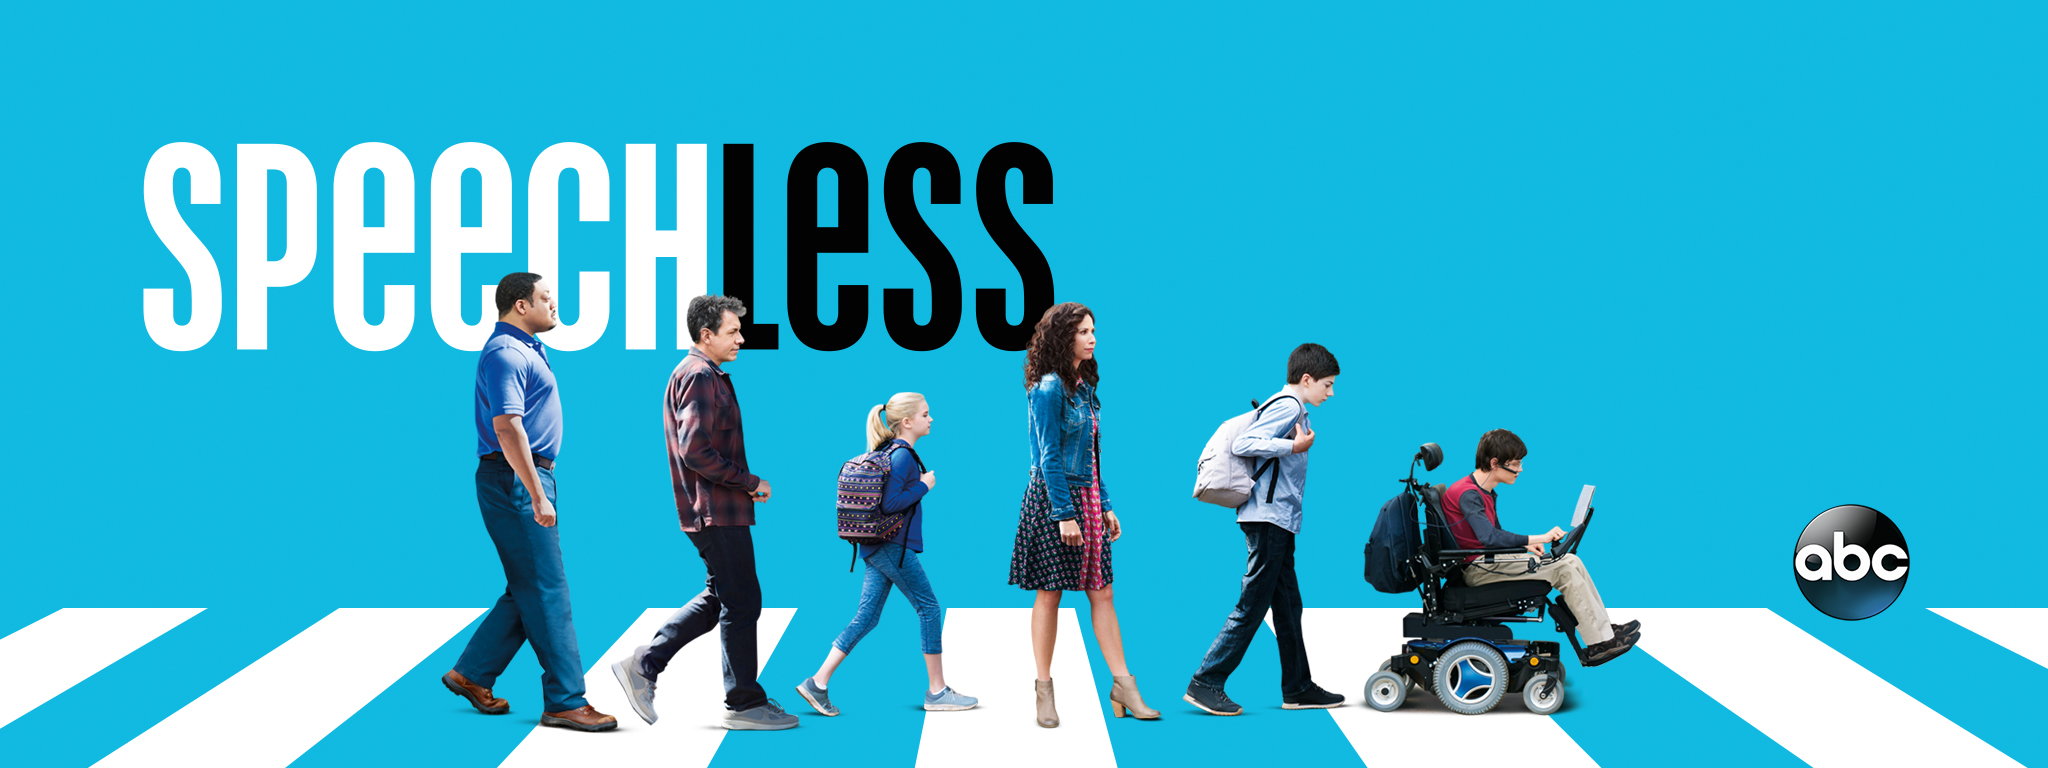 Six people are crossing a crosswalk. The person on the far right is a wheelchair user. The image resembles the Beetles iconic Abbey Road cover. The word "Speechless" is displayed at the top right. 